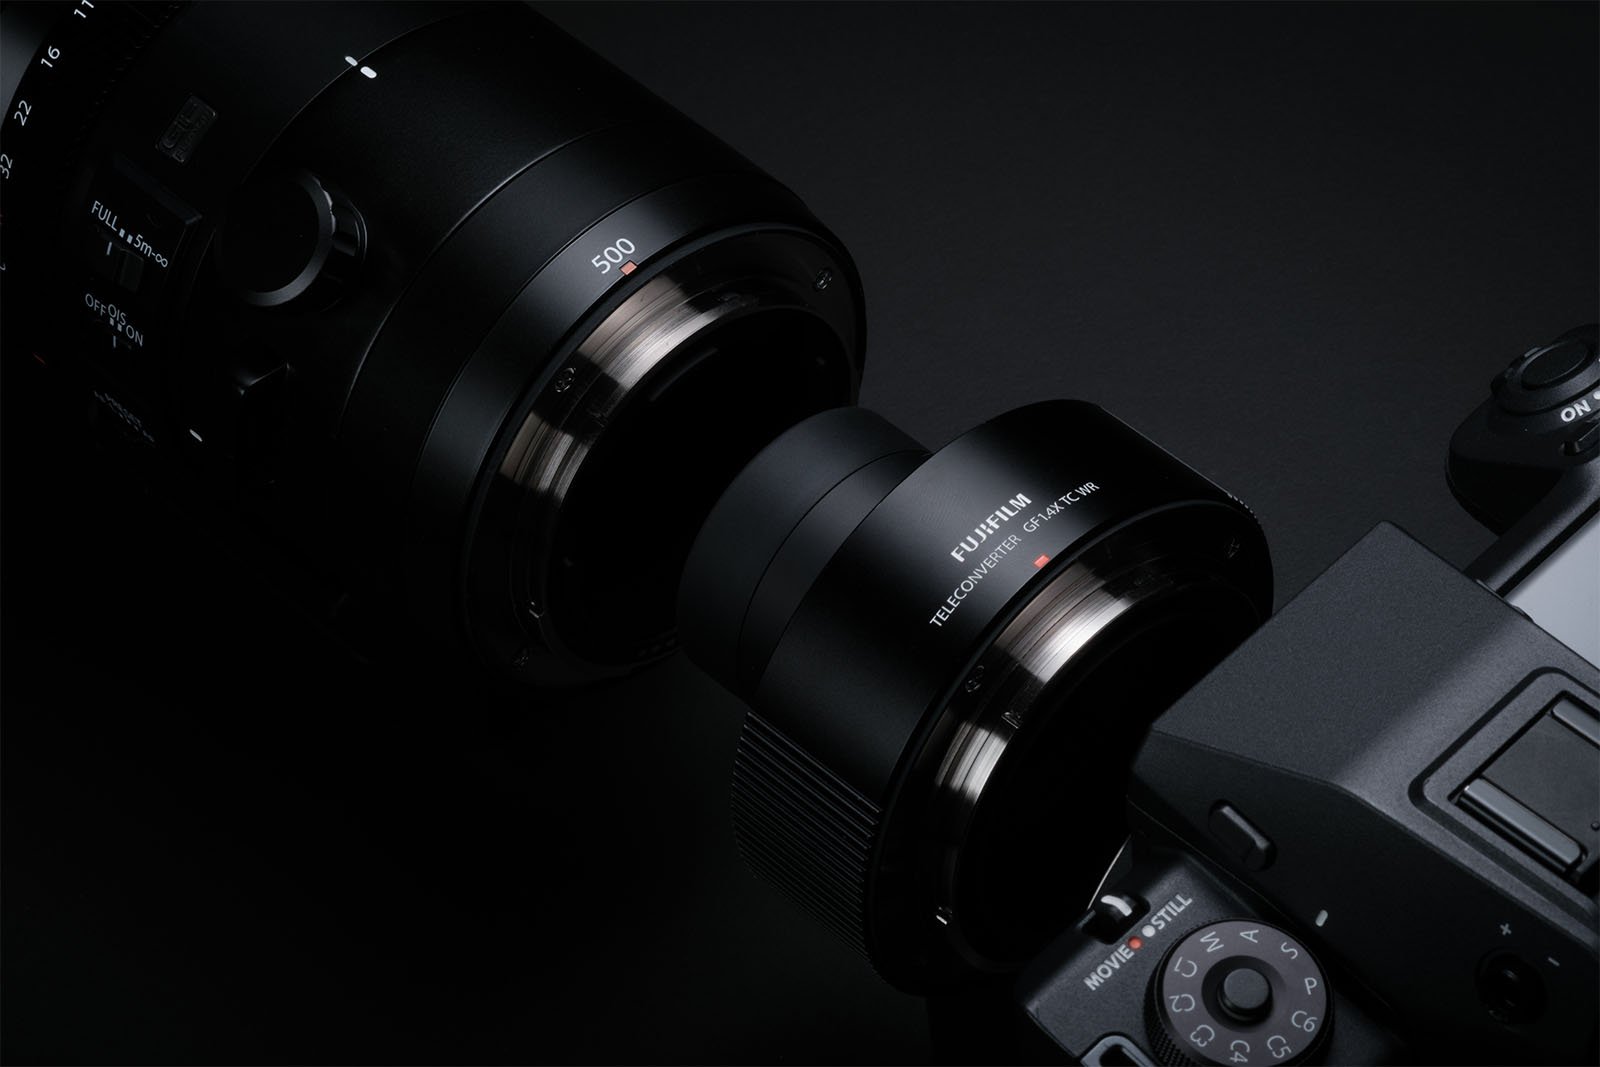 A close-up shot of a Fujifilm macro extension tube connected between a camera body and a lens on a black background. The metallic connections and labels on the tube and lens are visible, showcasing the brand and model details.